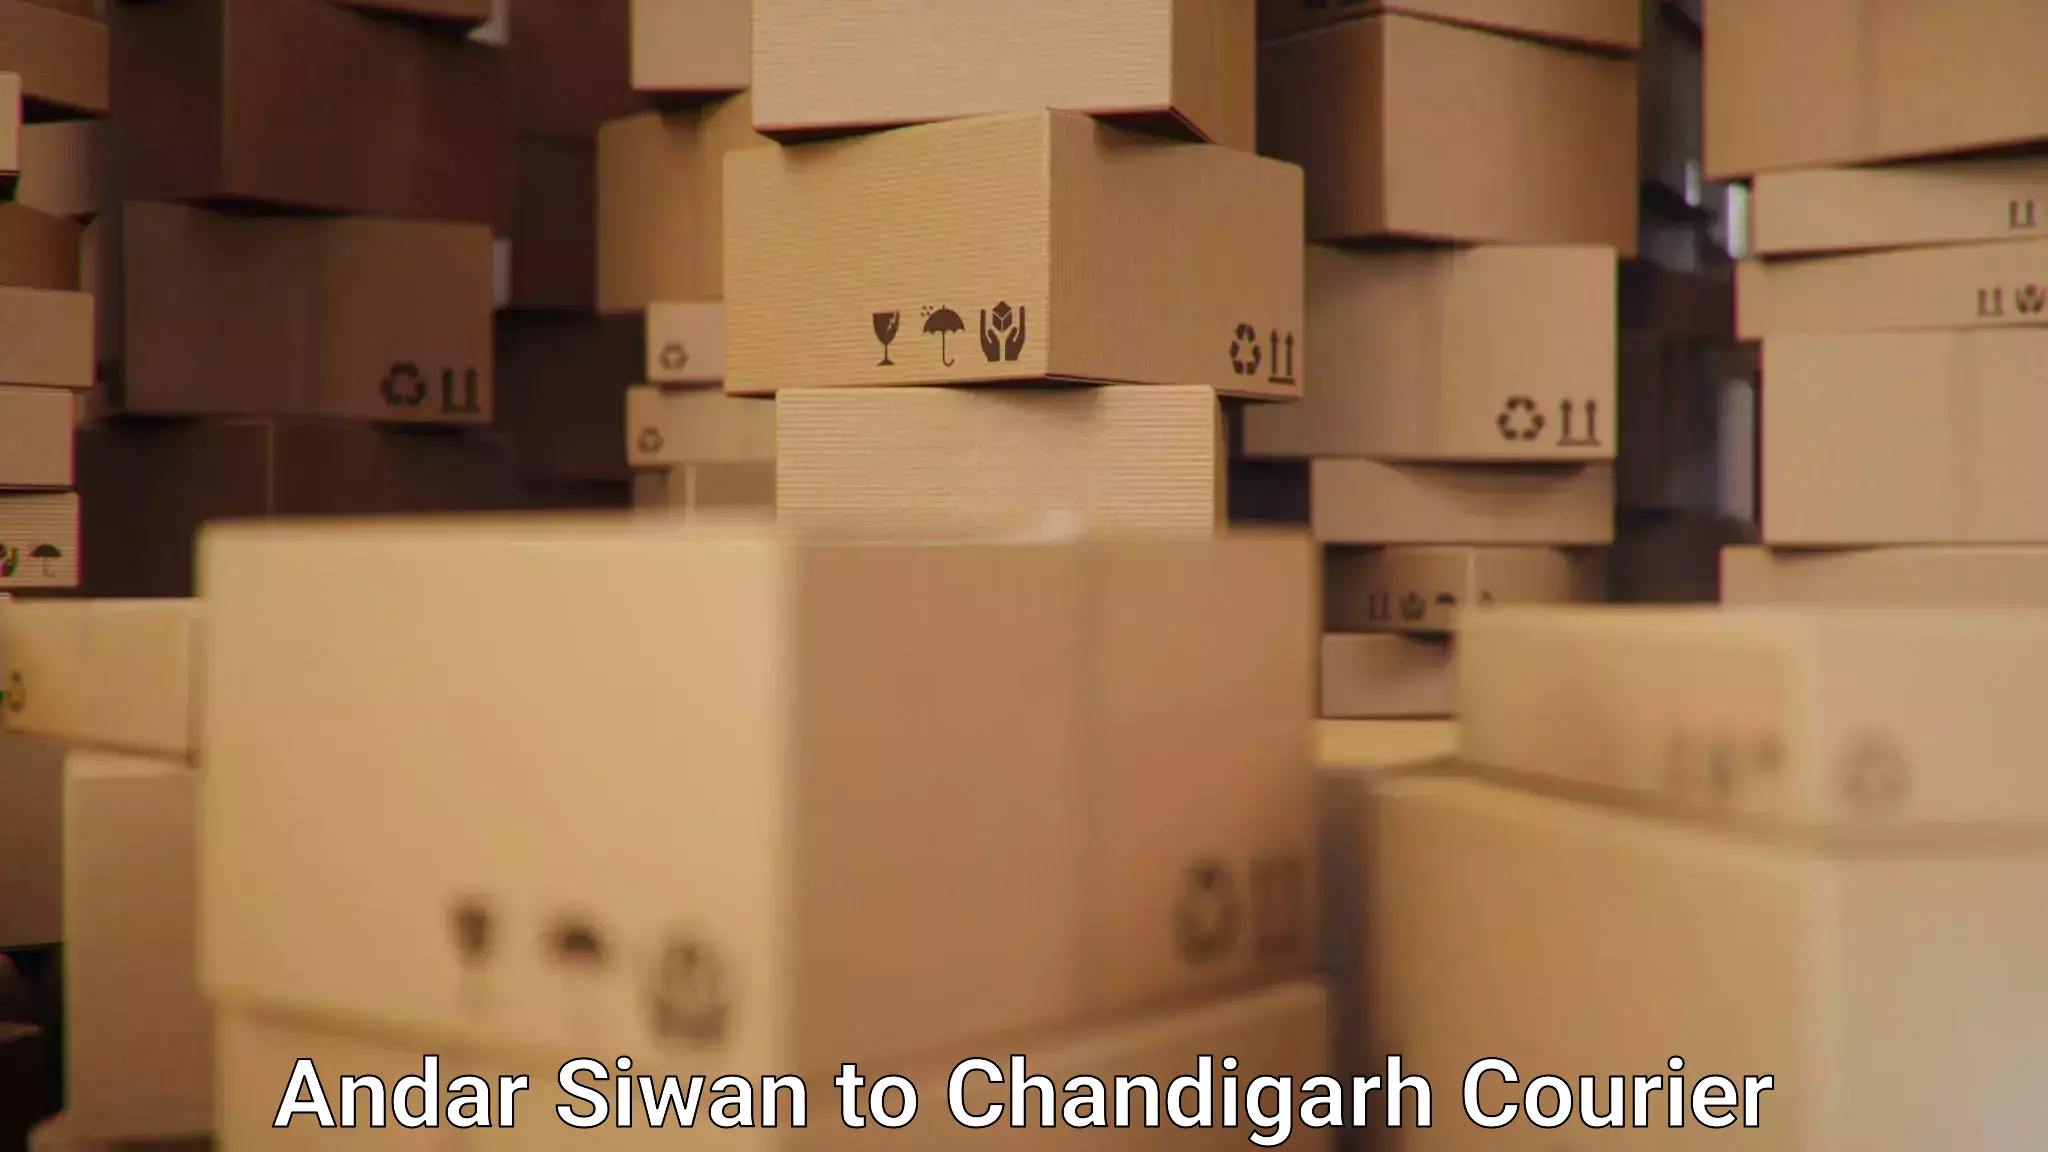 Flexible delivery schedules Andar Siwan to Chandigarh